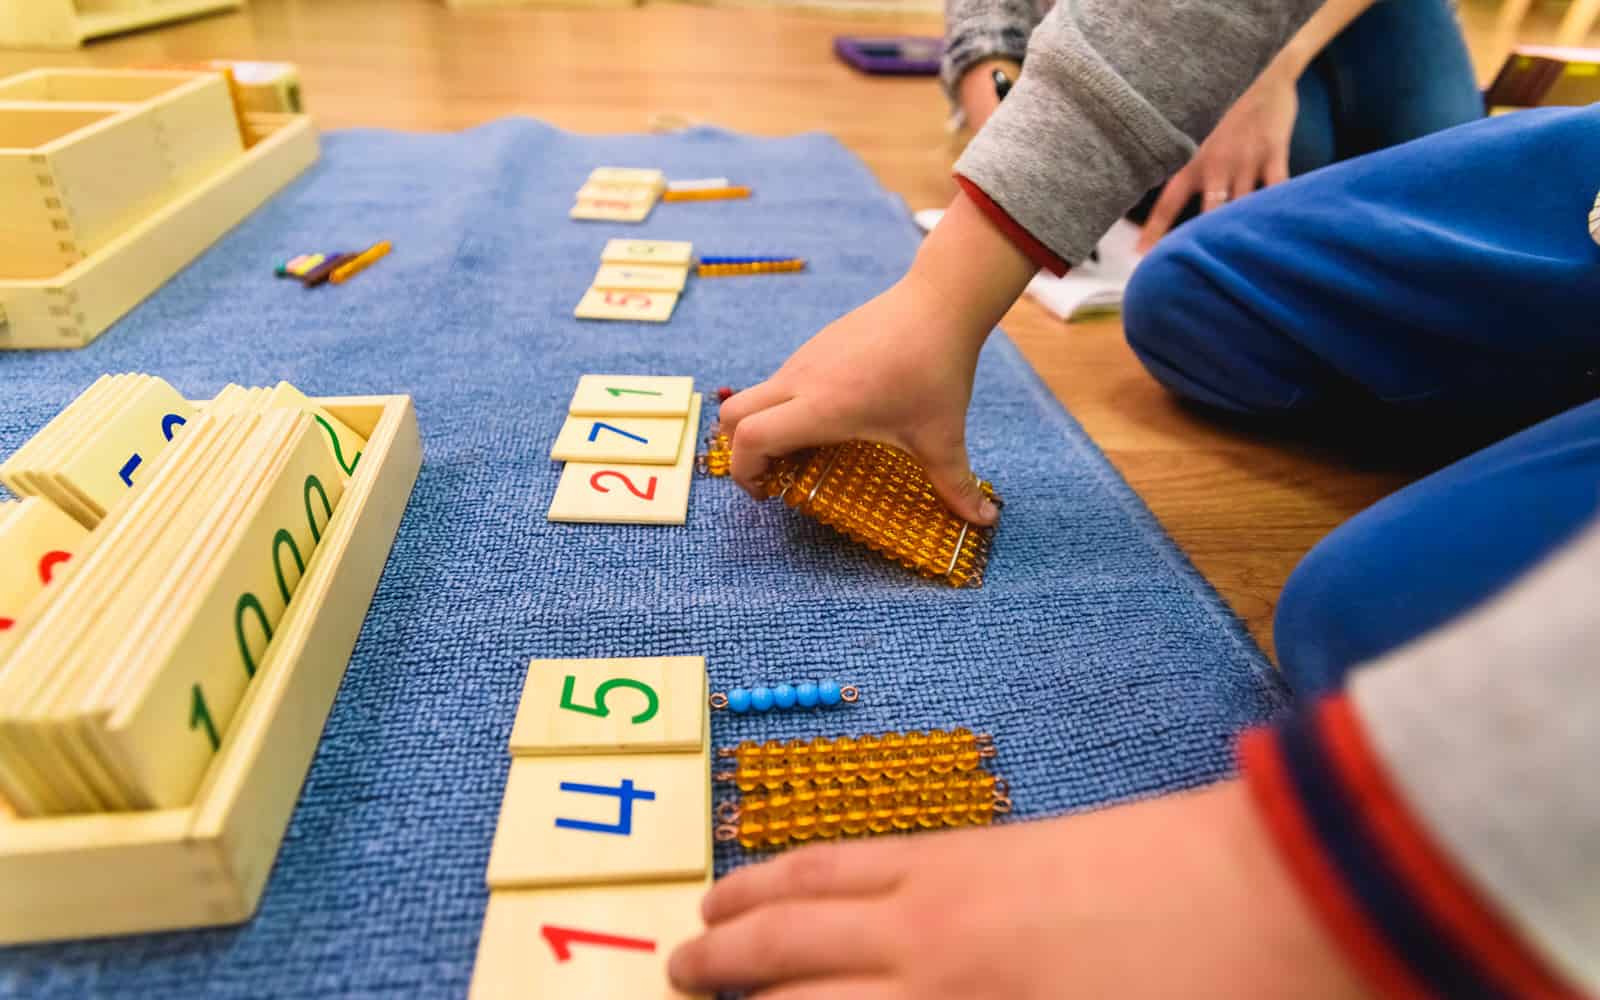 Why Montessori in the time of COVID-19?